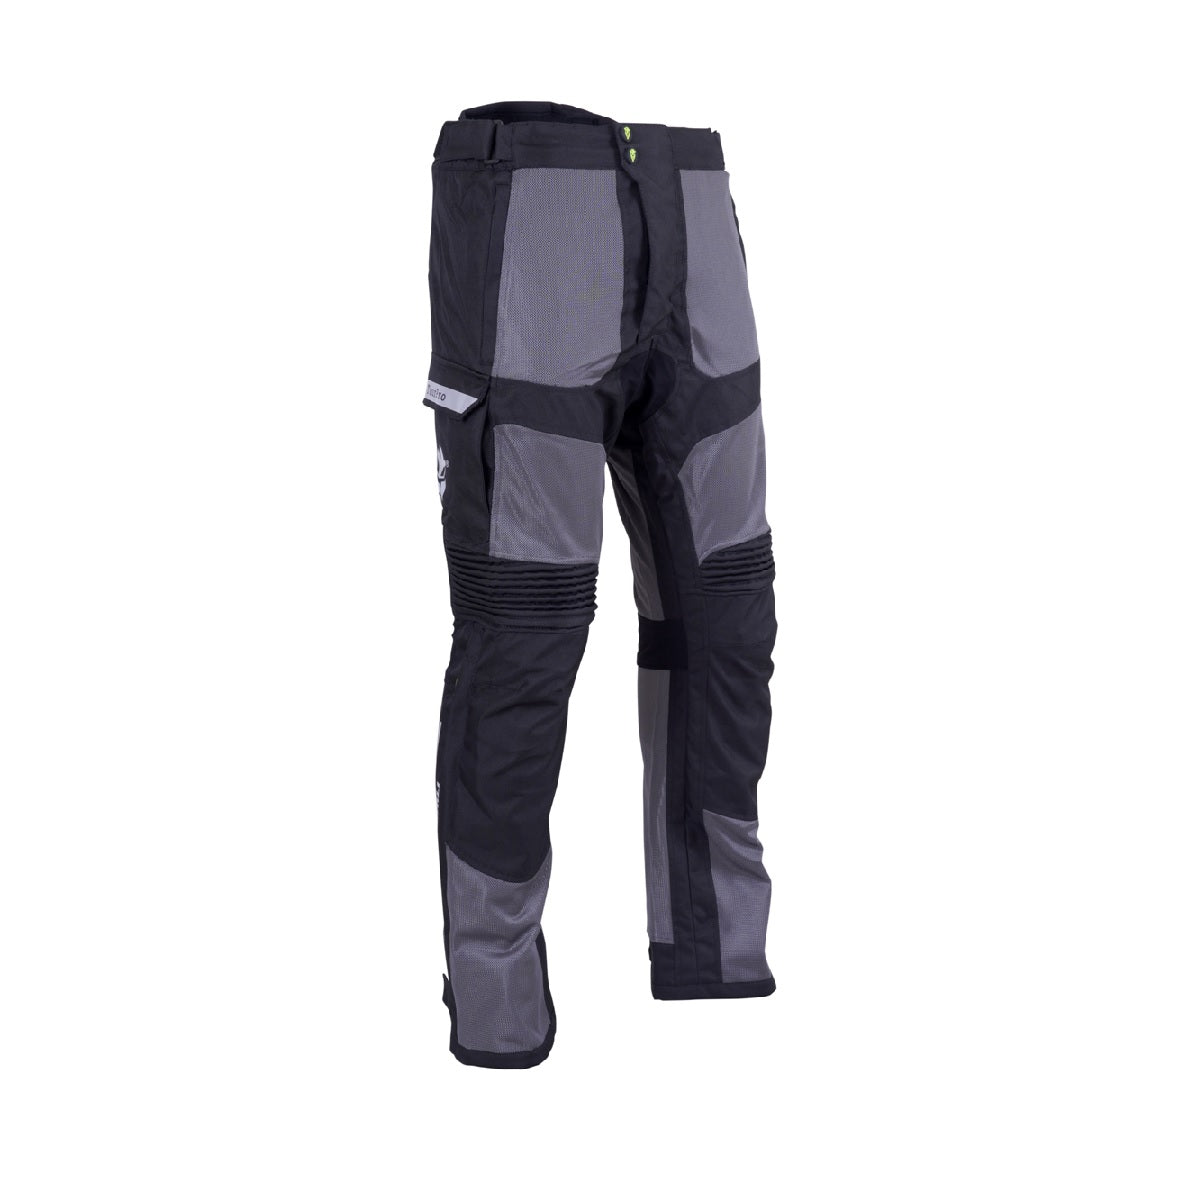 The Best Textile Motorcycle Pants for 2023